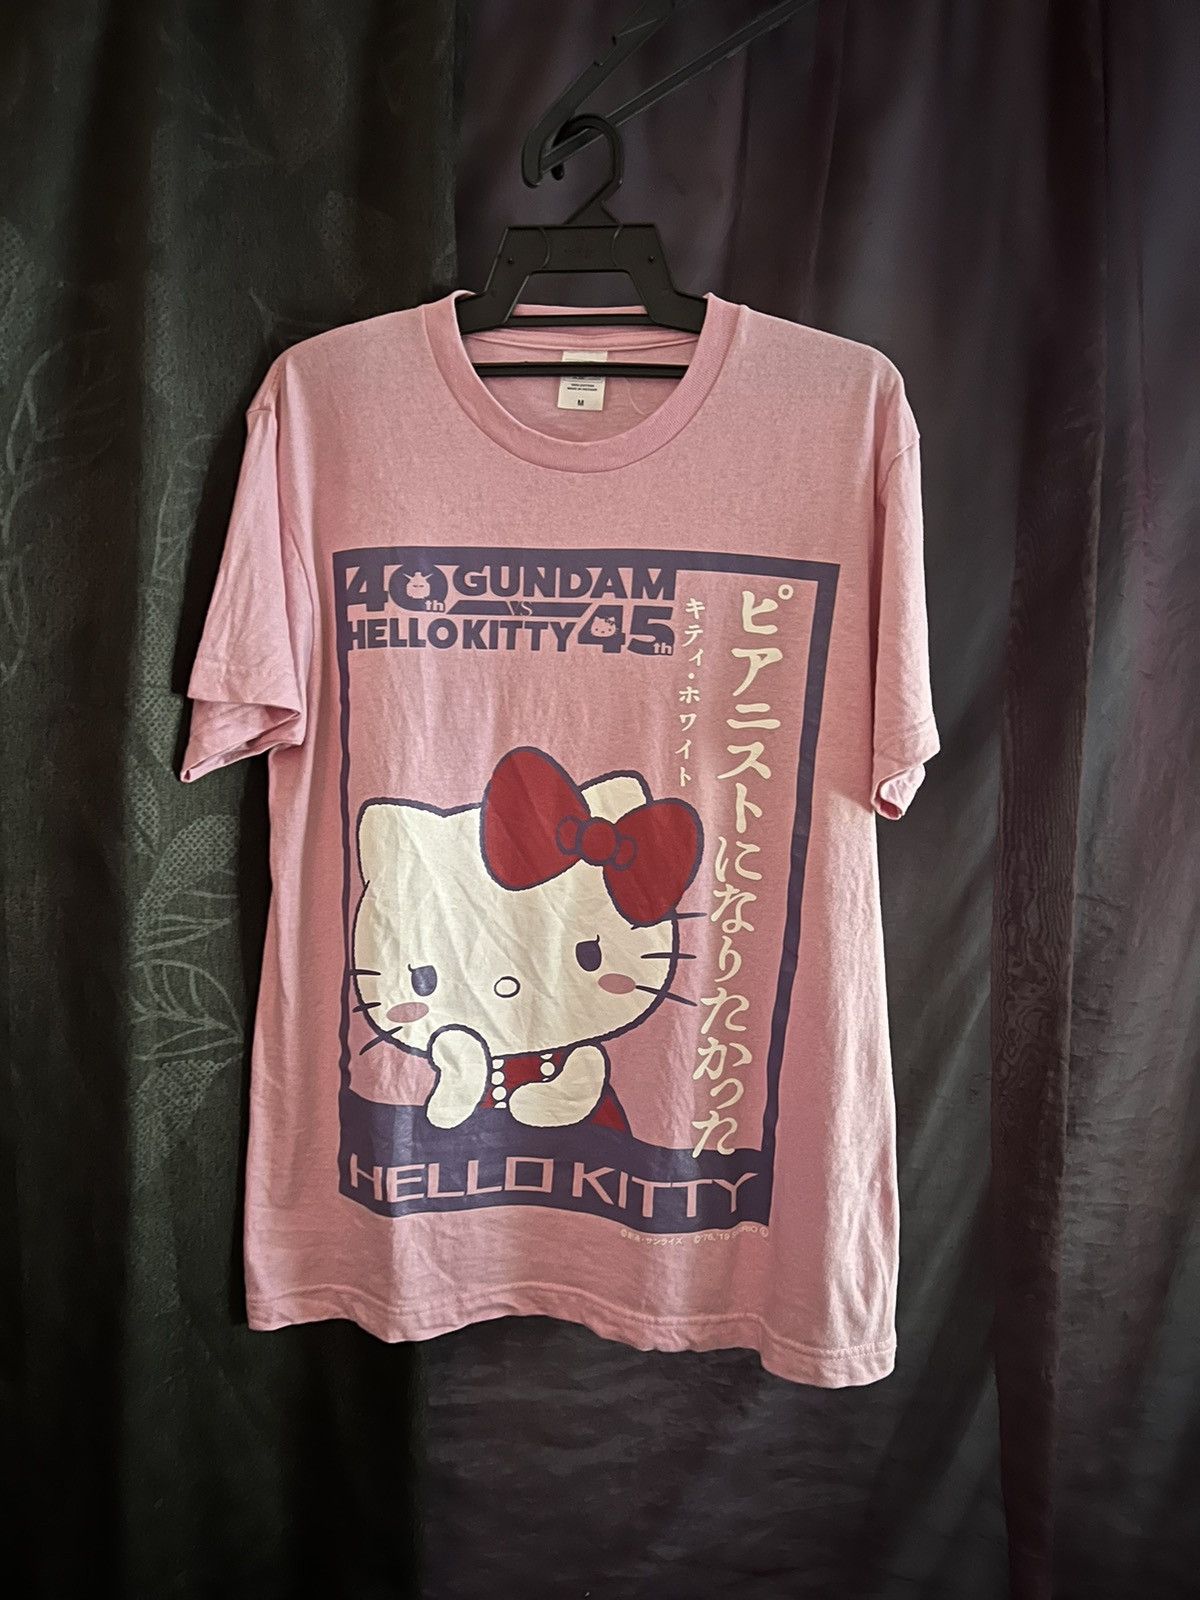 Japanese Brand LIMITED EDITION 2019 GUNDAM X HELLO KITTY PINK TEE IN PINK Size US M / EU 48-50 / 2 - 7 Thumbnail